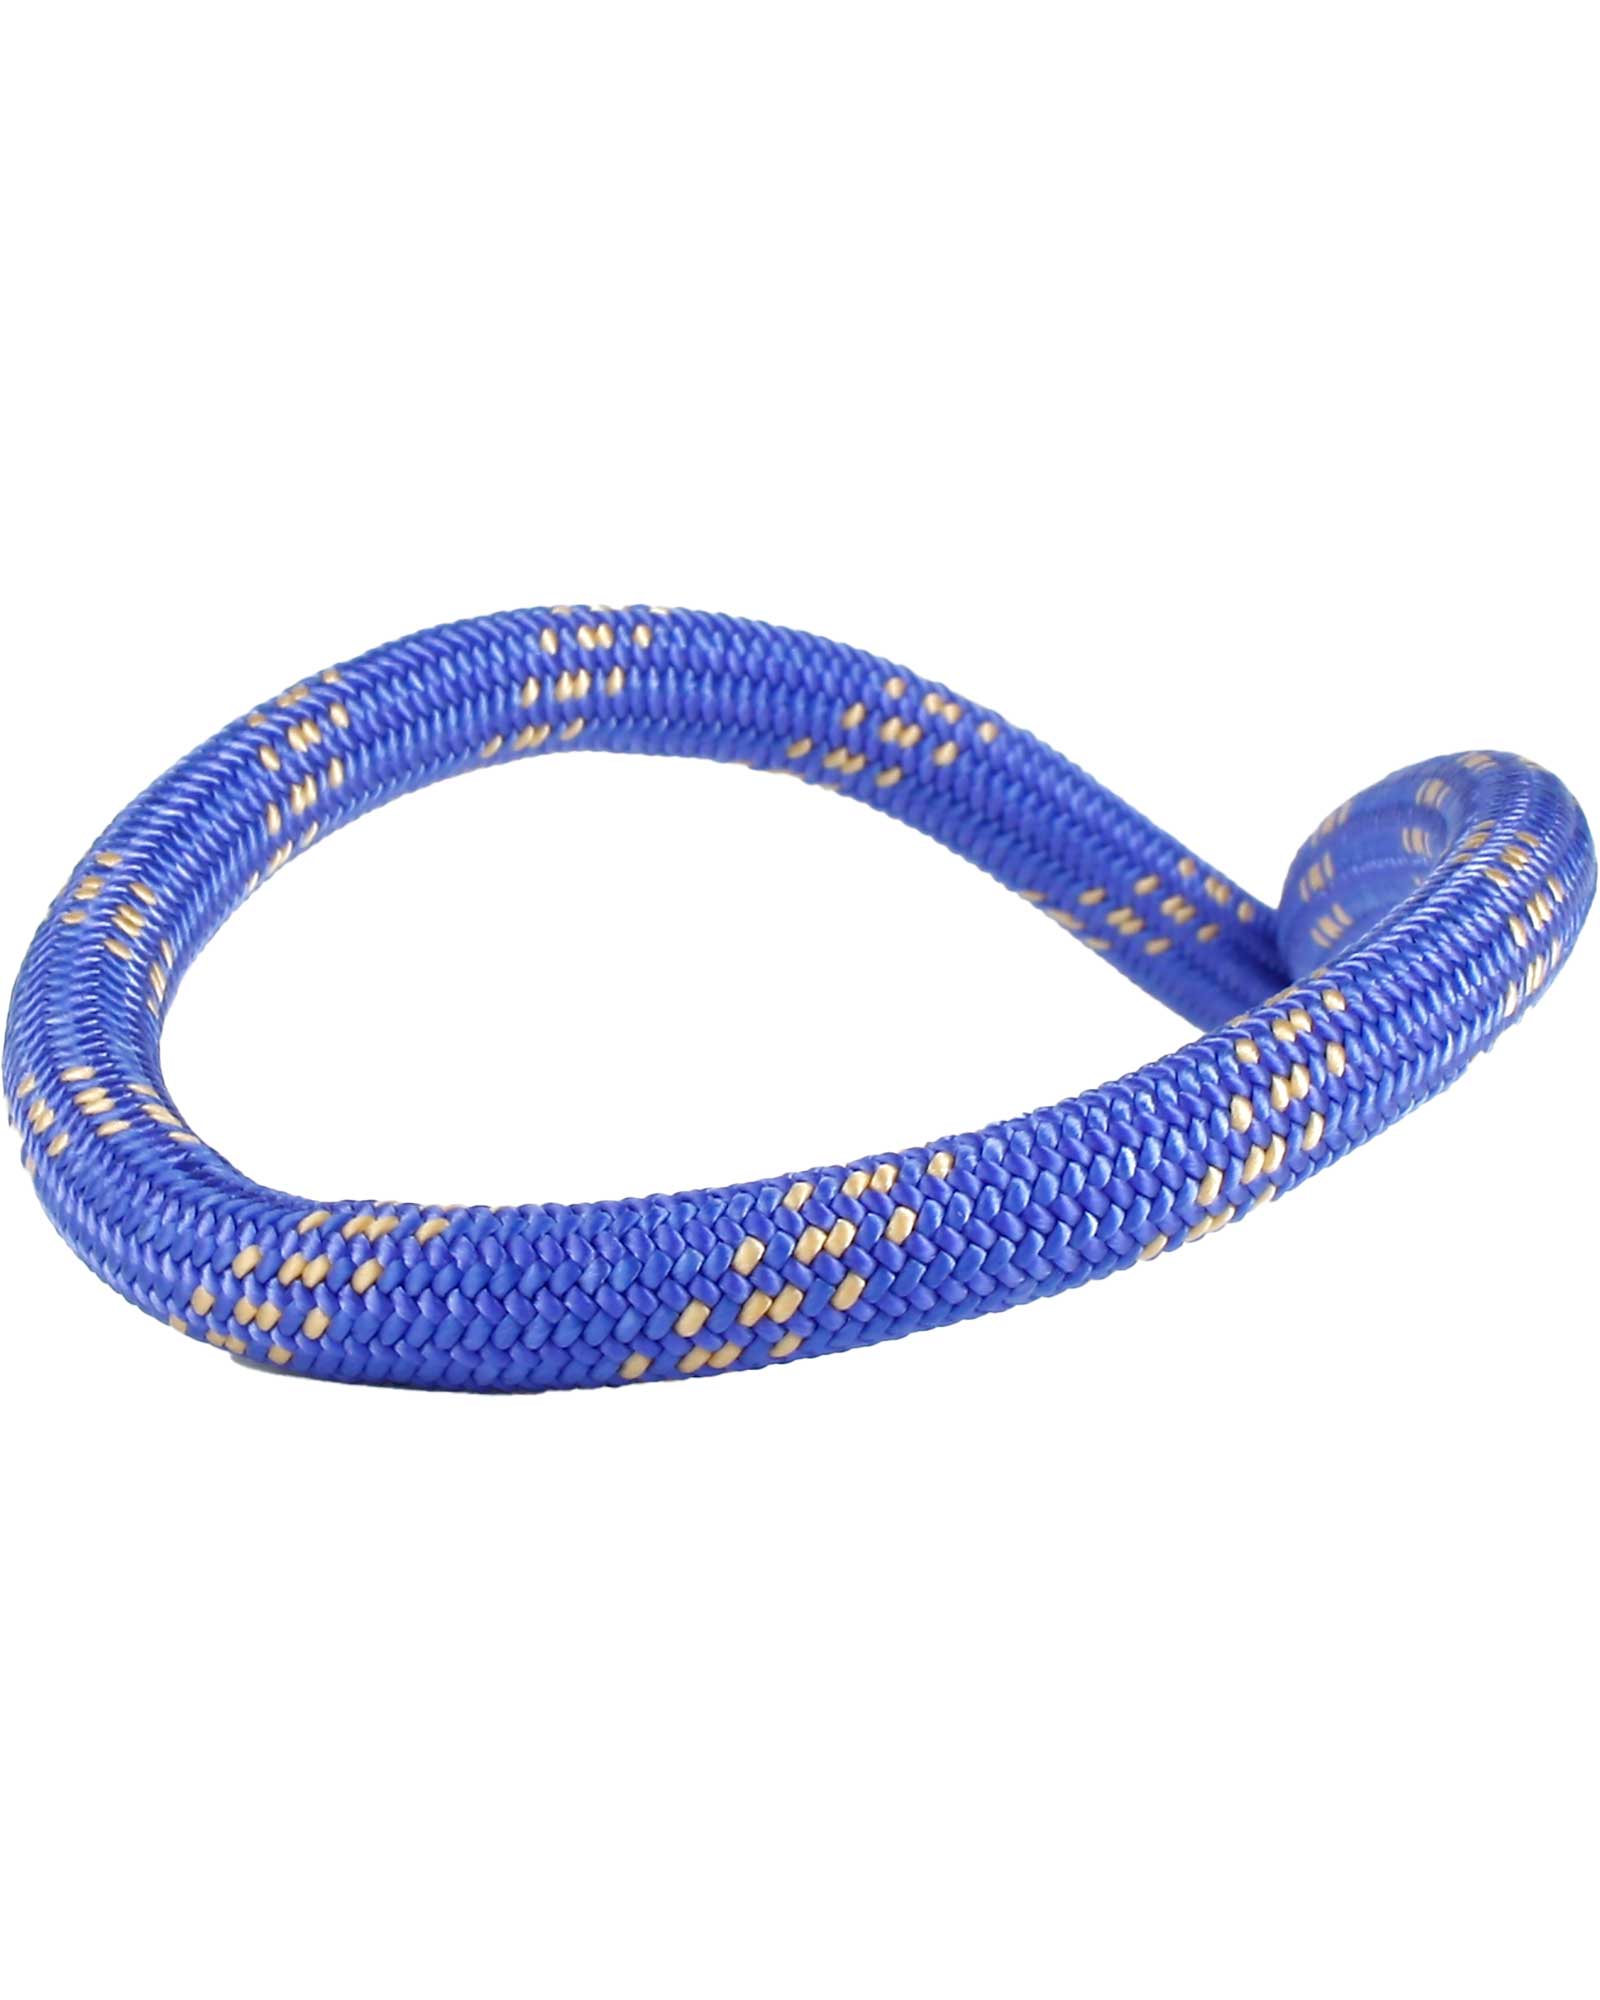 Edelweiss Oxygen Supereverdry 8.2mm x 60m Rope - Blue 60m